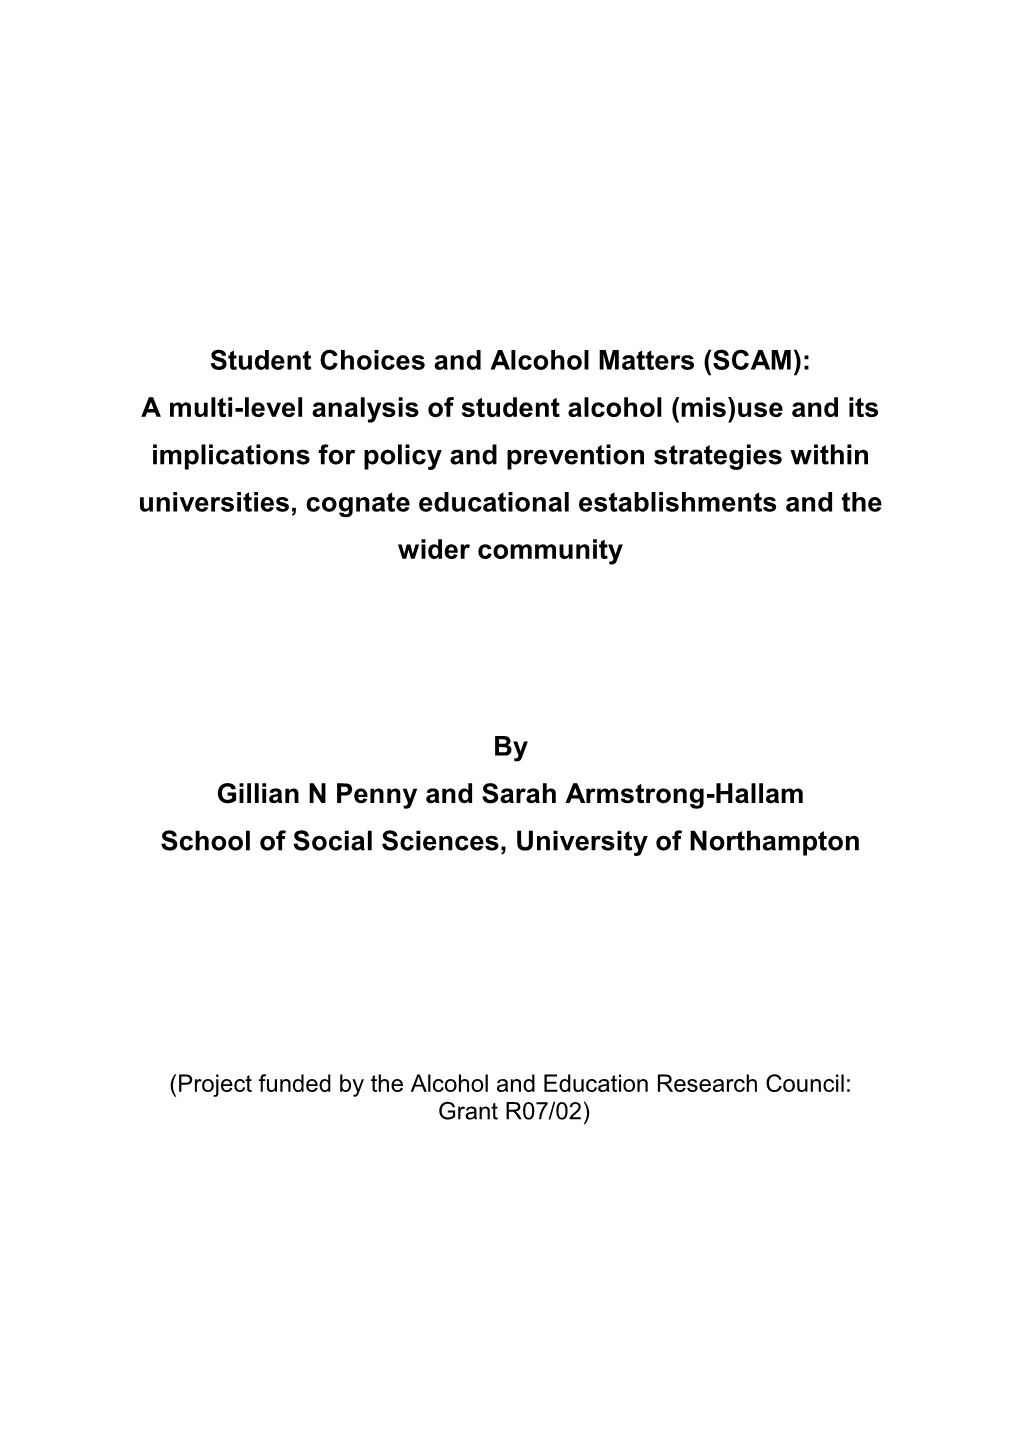 Student Choices and Alcohol Matters